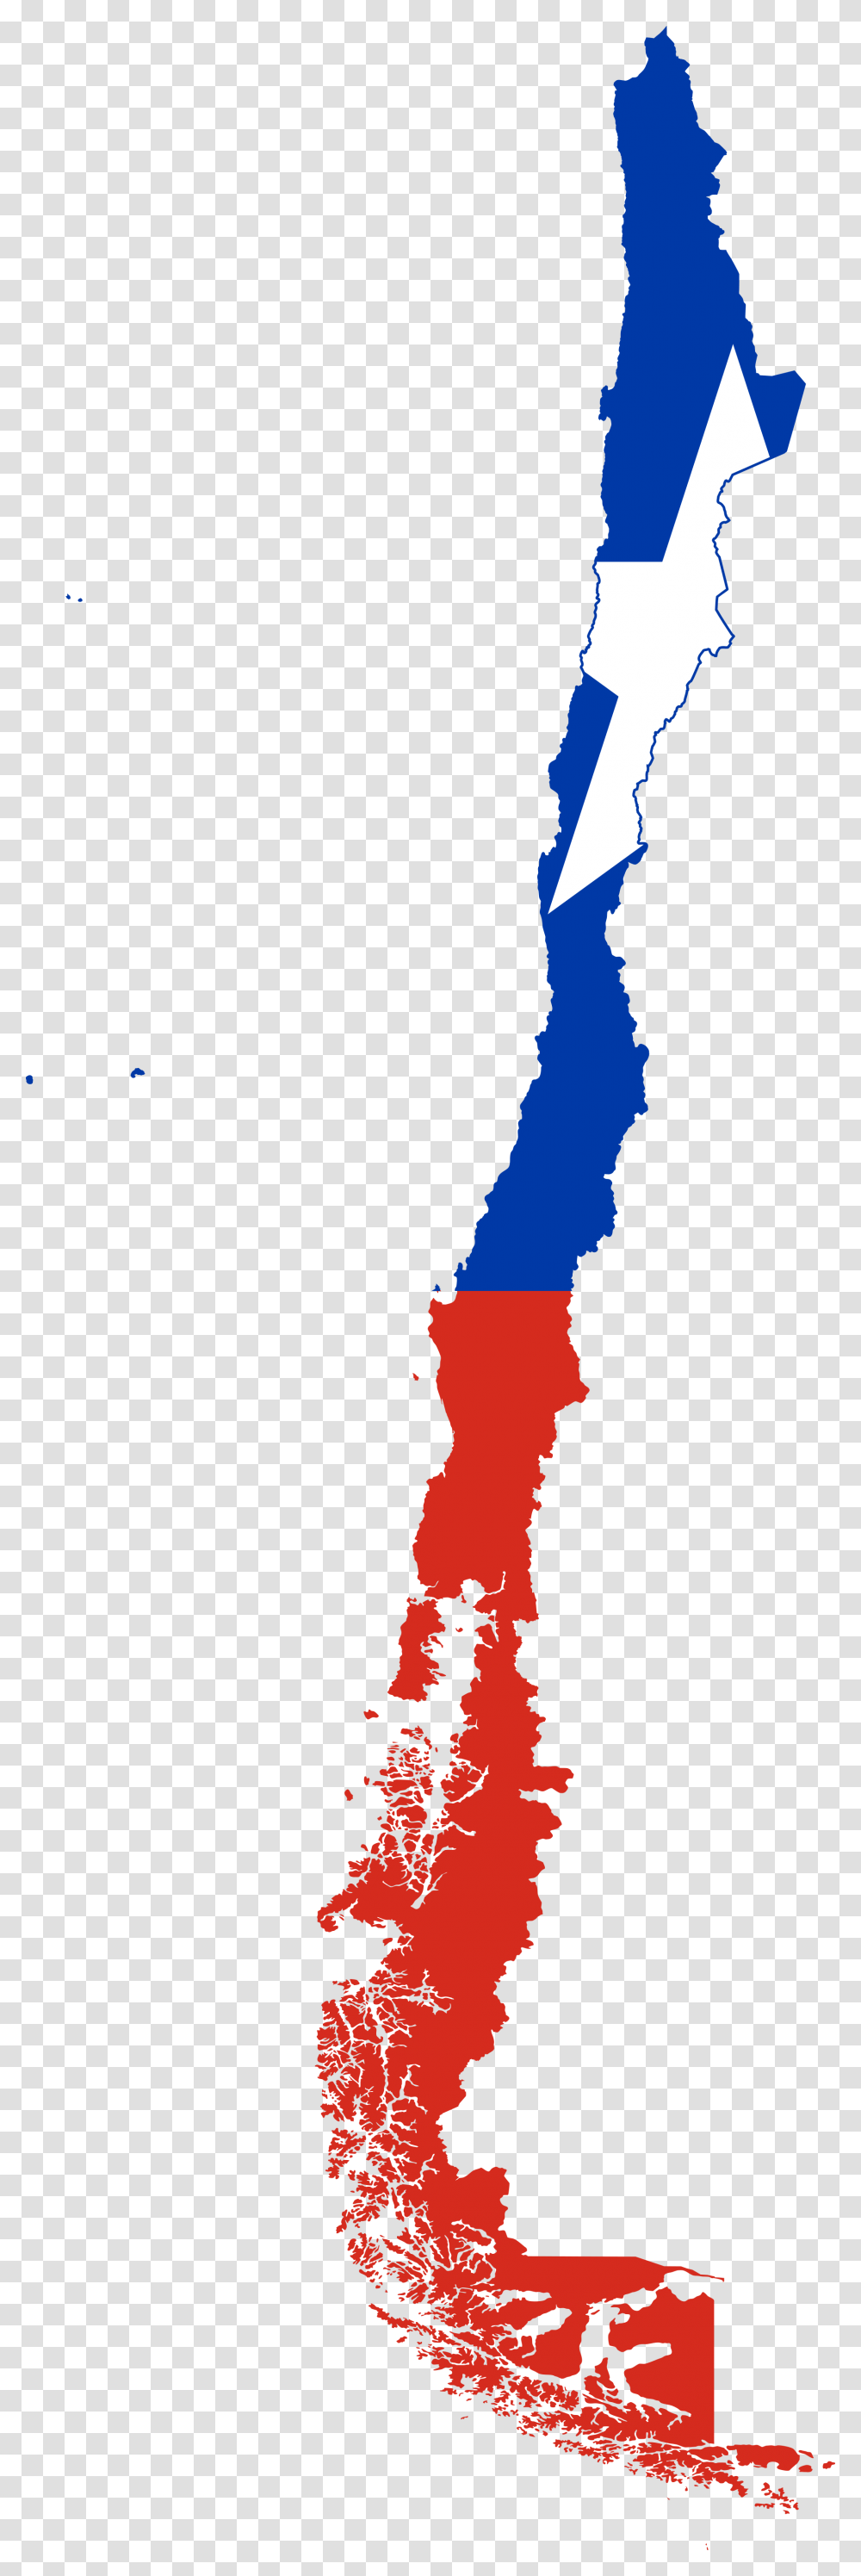 Flag Map Of Chile, Dinosaur, Reptile, Animal, Silhouette Transparent Png